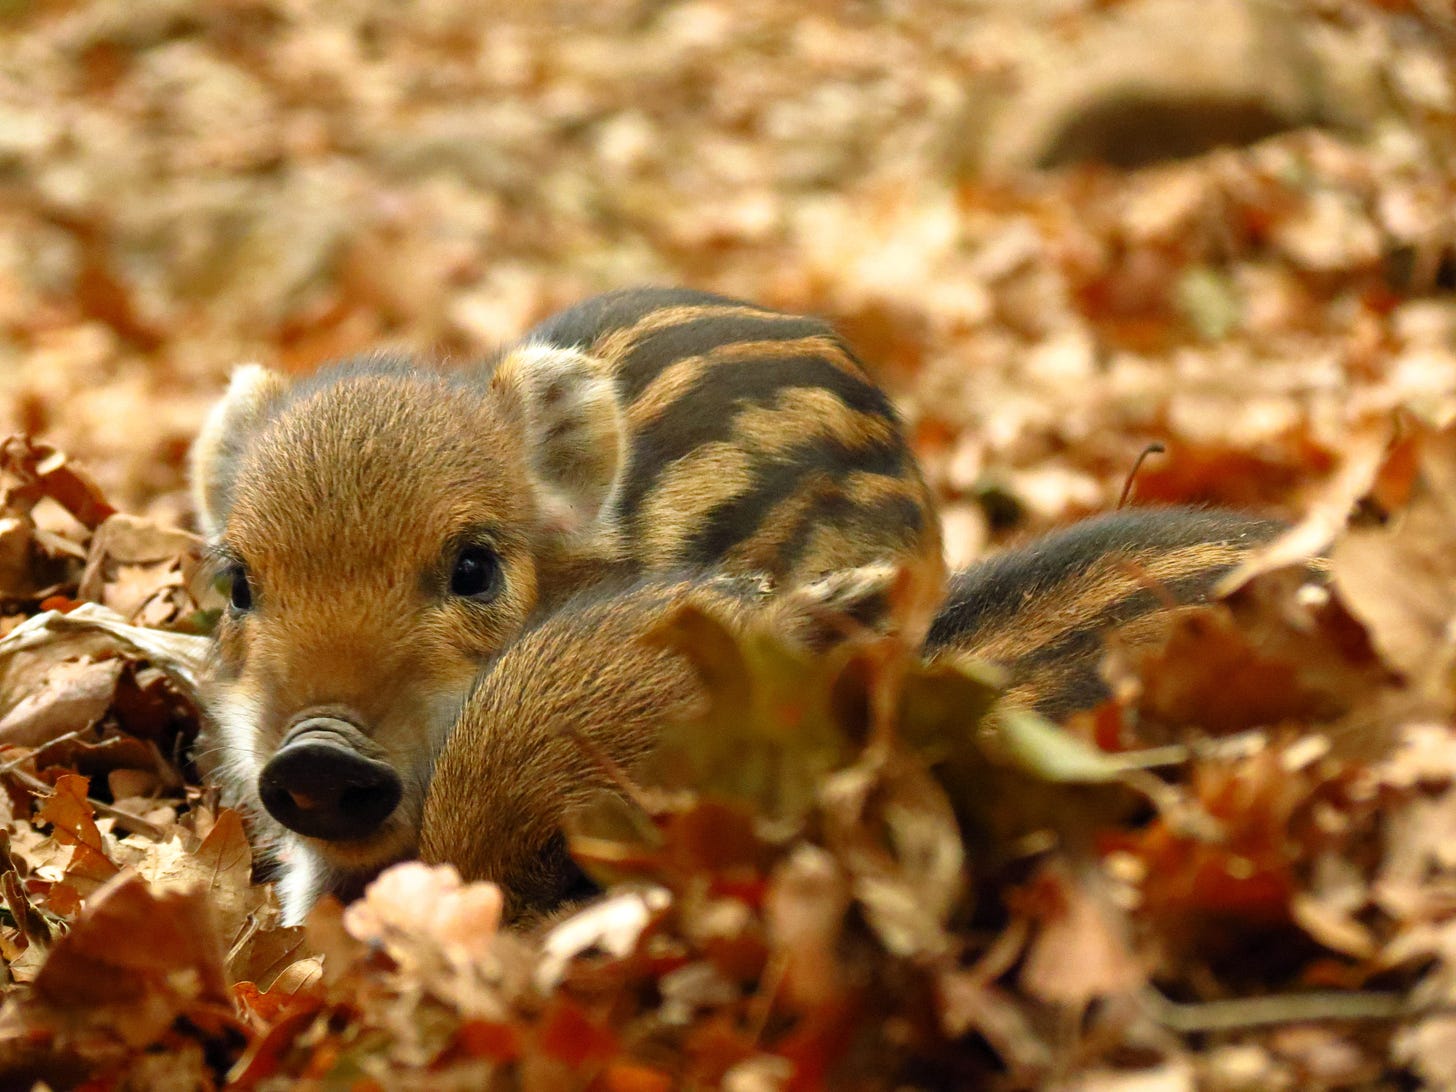 Two brown striped piglets snuggling together amid autumn leaves